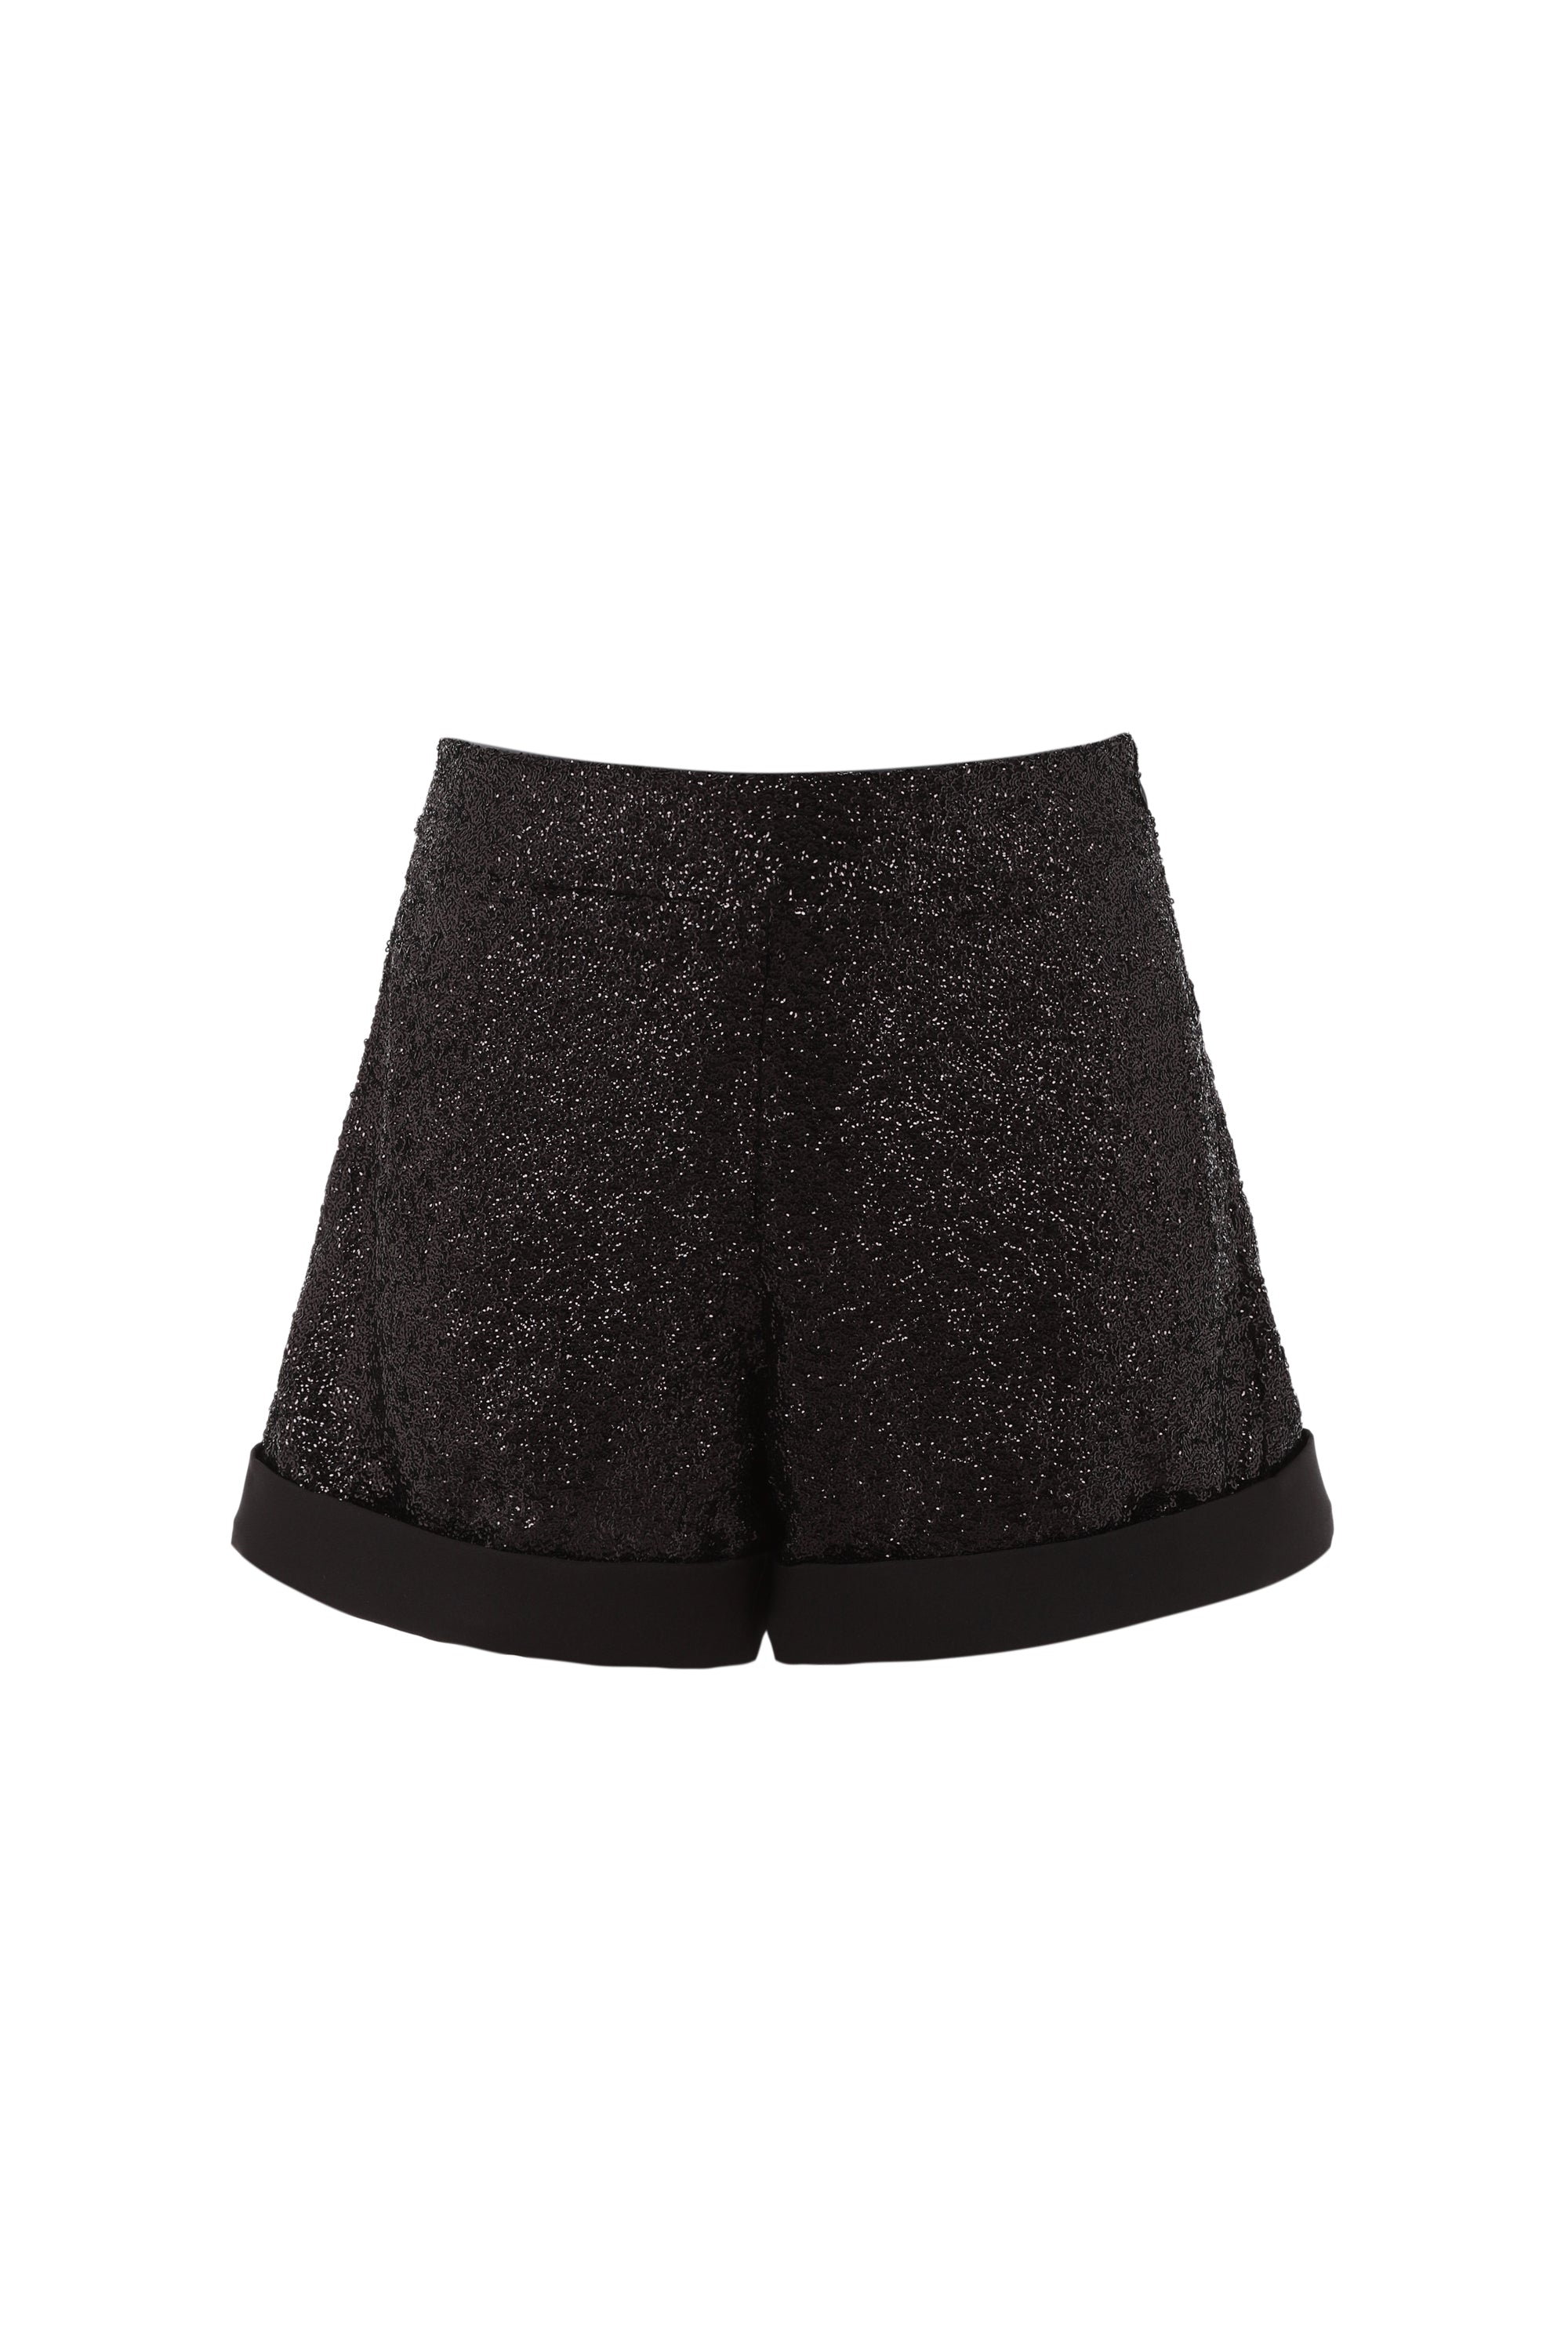 Black shorts with sequins